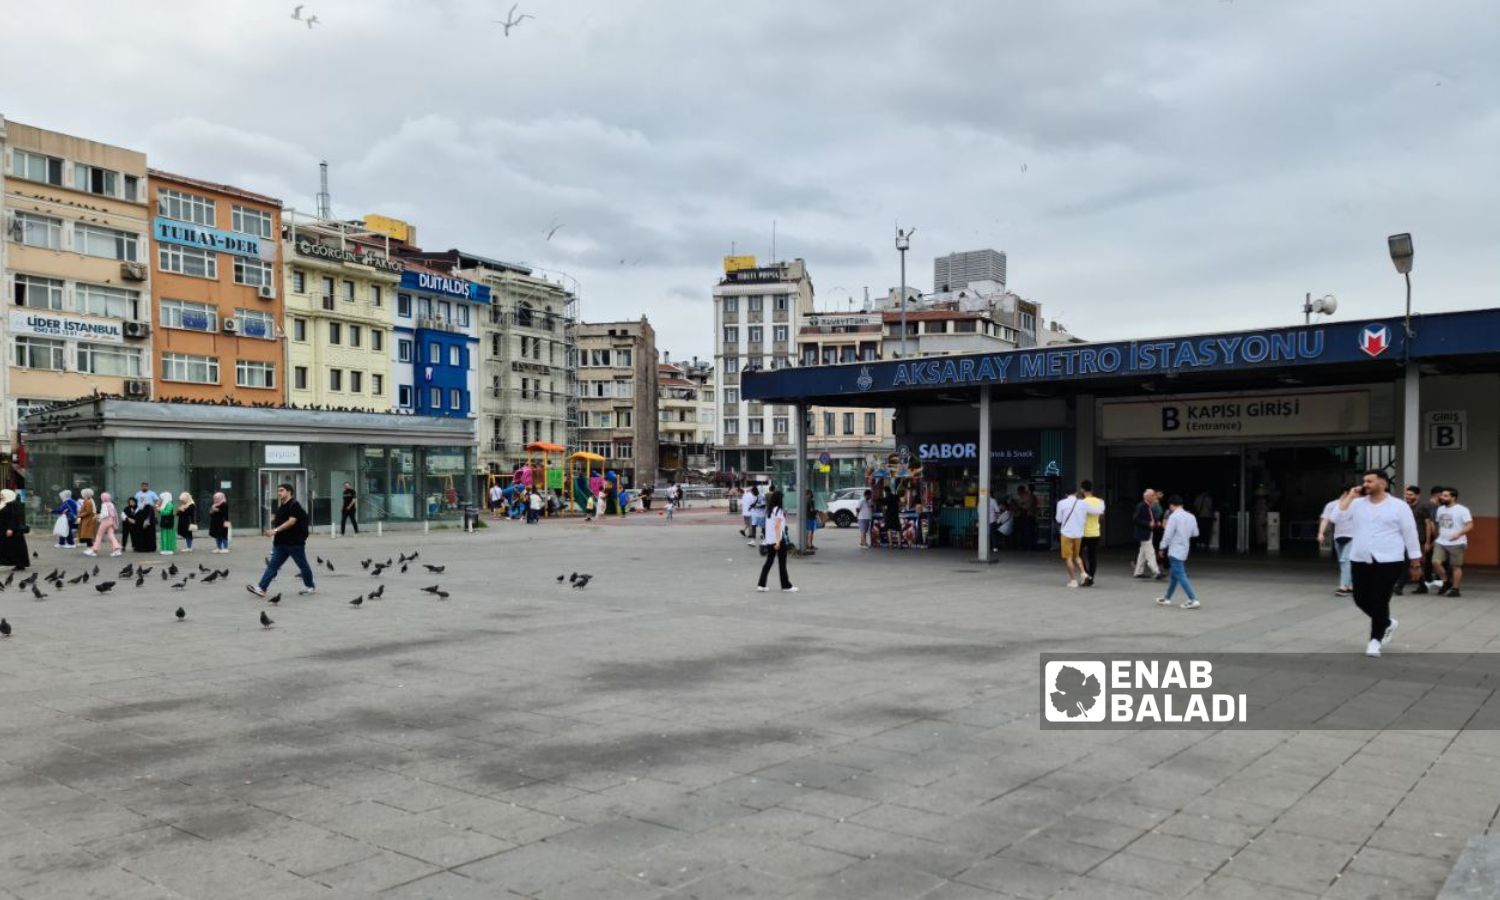 Aksaray Square in the center of Istanbul is considered one of the most vital points in the densely-populated city with refugees, and due to the concentration of the Arab market in the Fatih district, most Syrians are forced to pass through the famous square - June 29, 2023 (Enab Baladi)